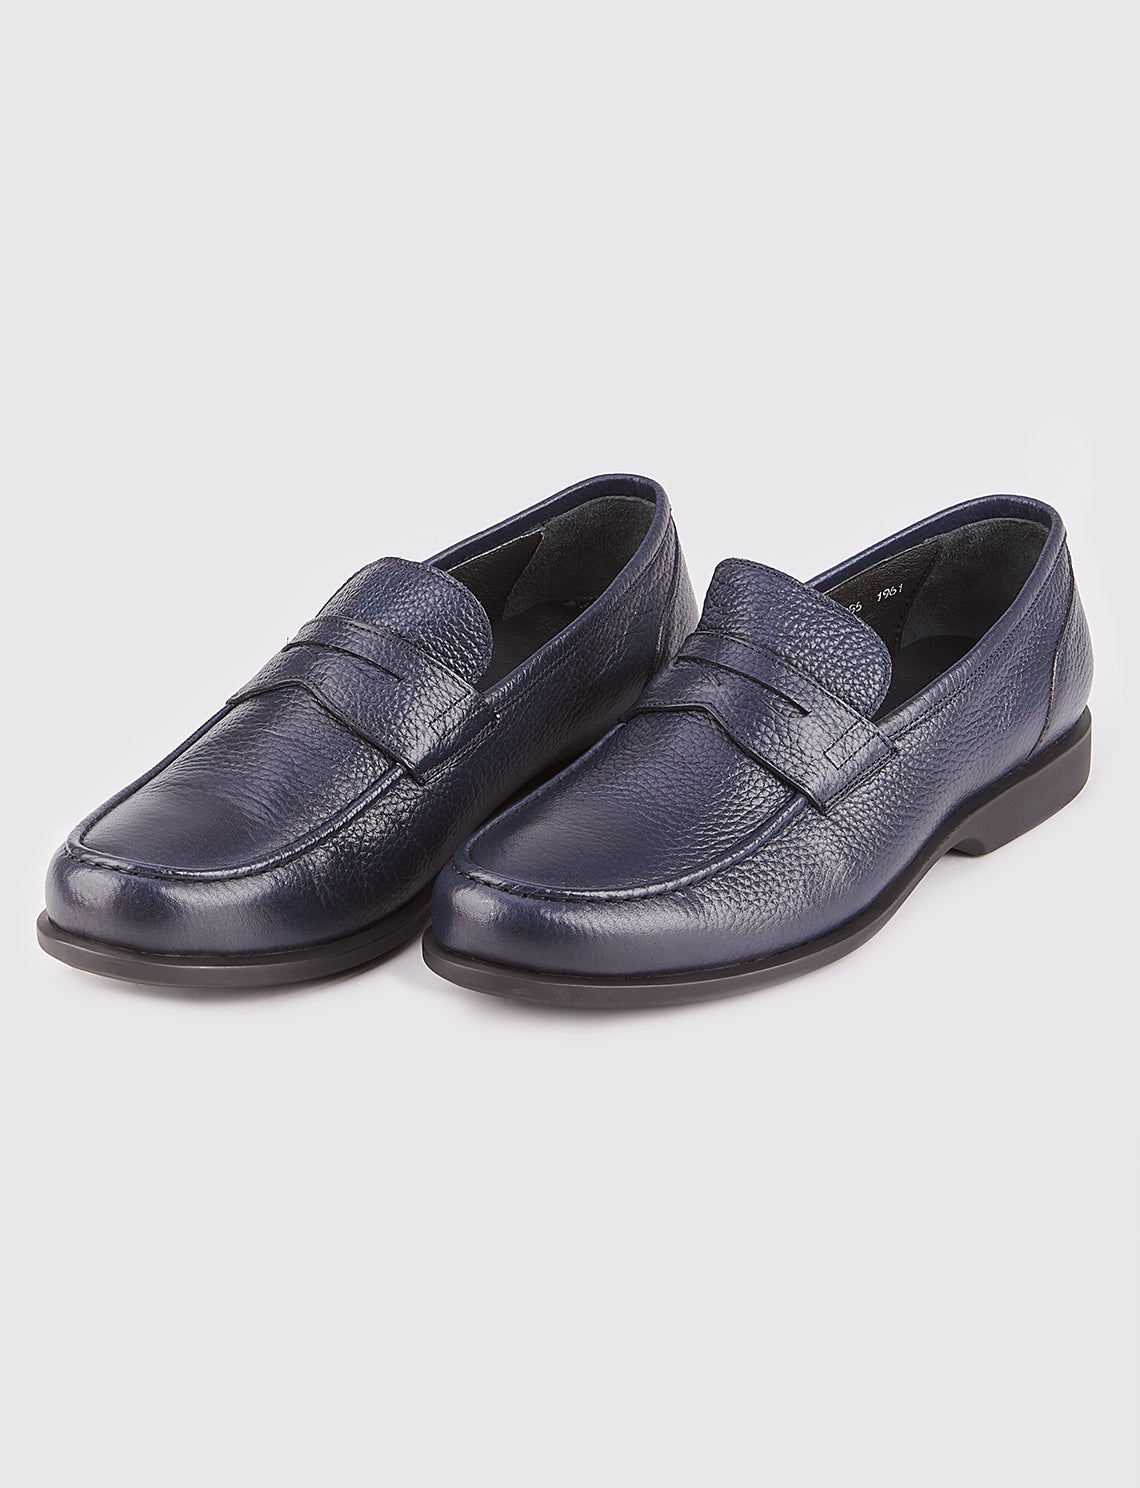 Men Navy Blue Genuine Leather Round Toe Penny Loafers